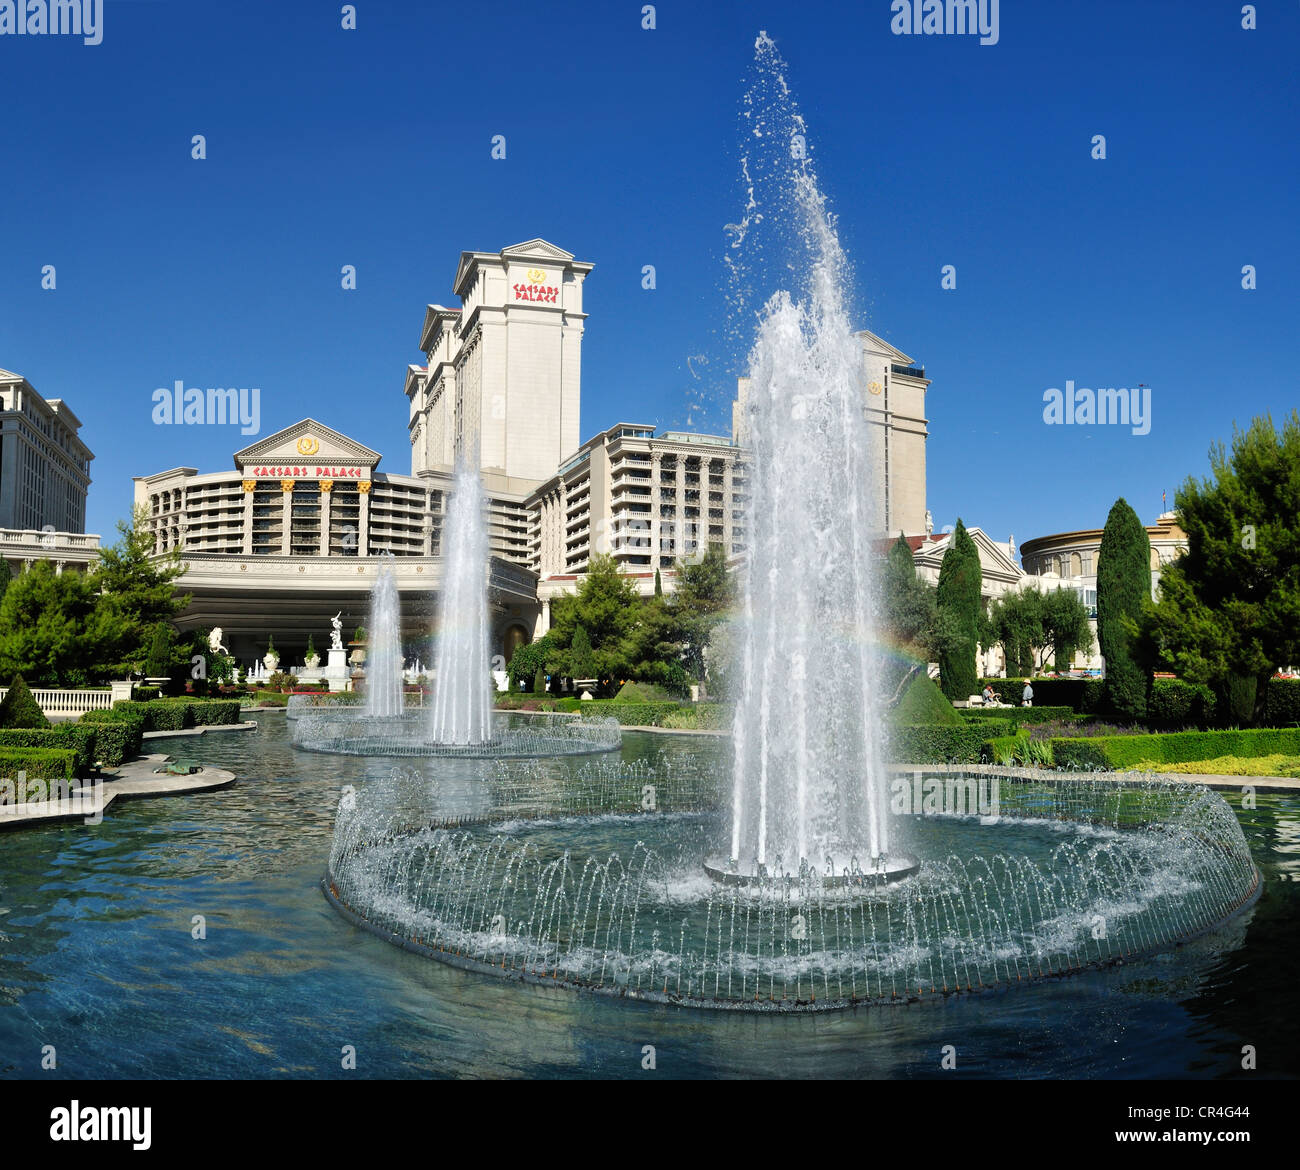 Fountain in front of Cesars Palace Hotel and Casino, Las Vegas, Nevada, USA, North America Stock Photo